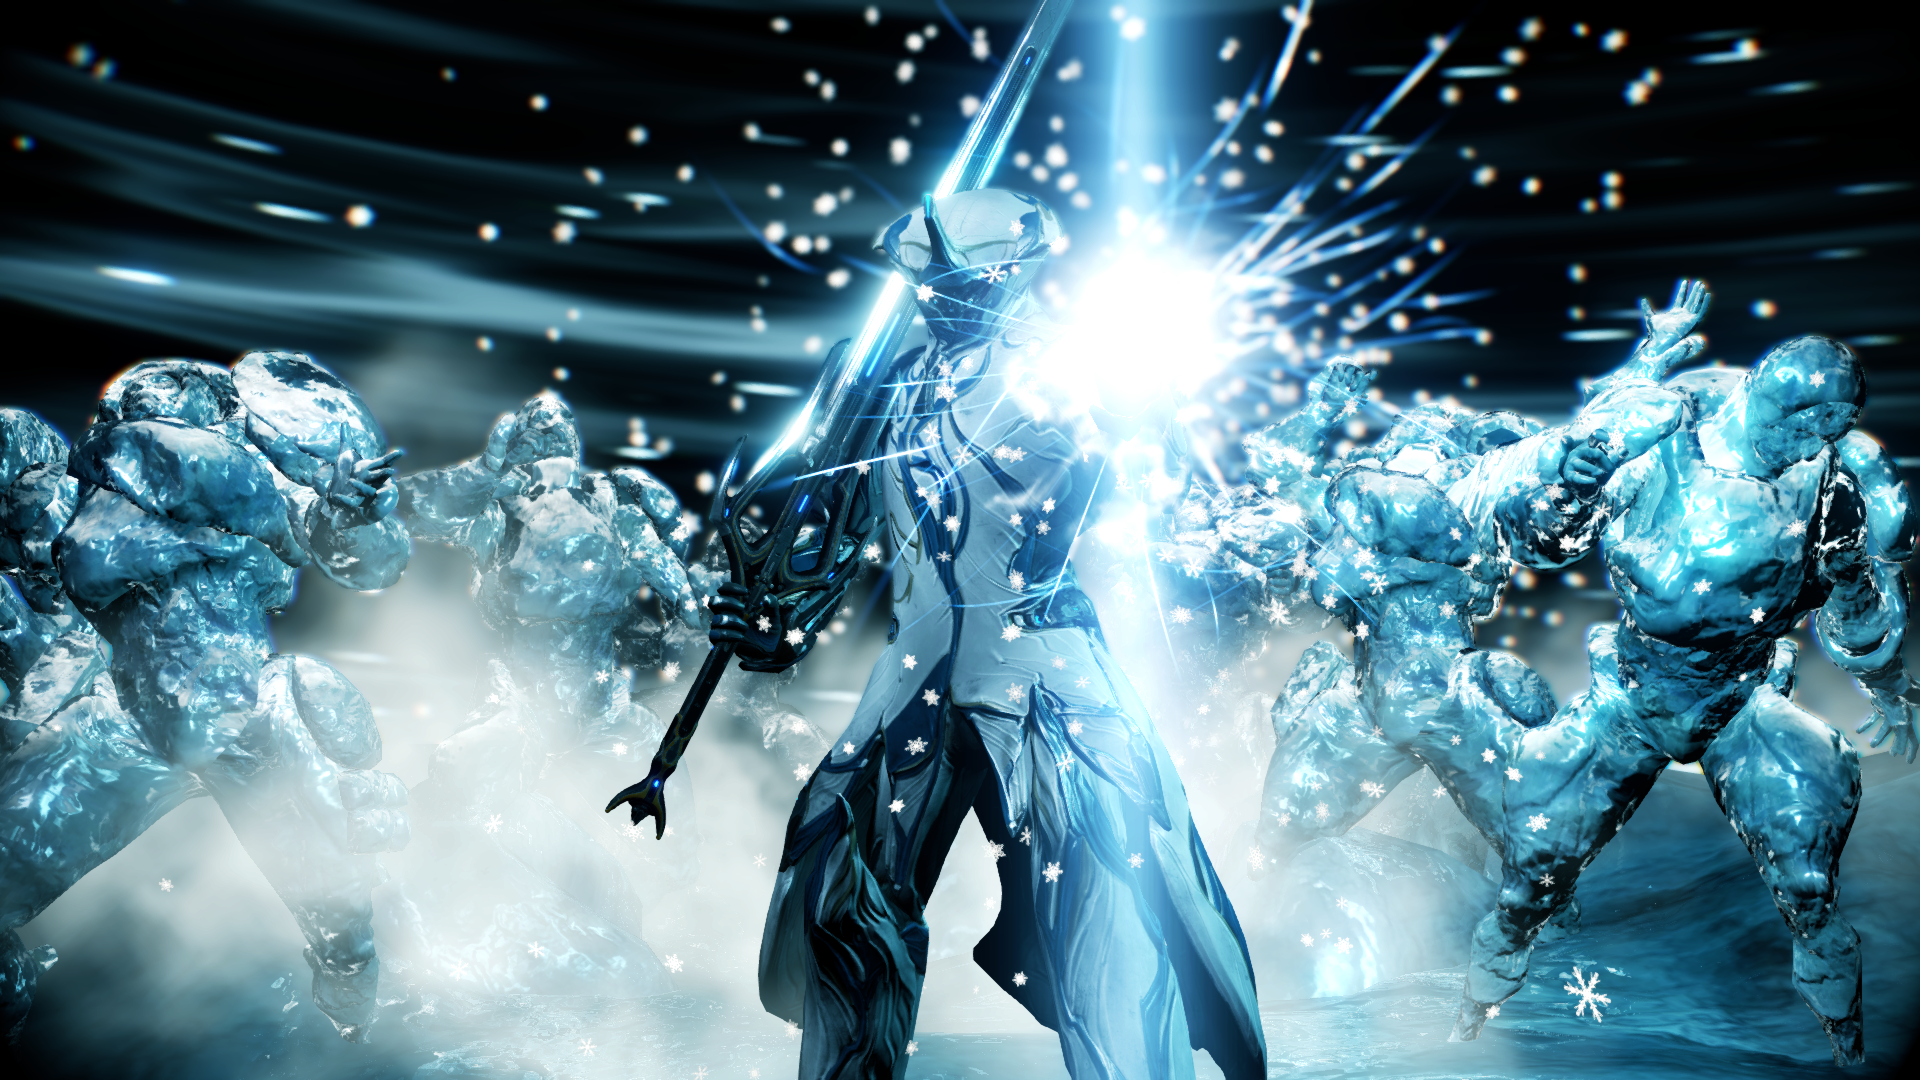 warframe wallpaper frost displaying 16 images for warframe wallpaper 1920x1080